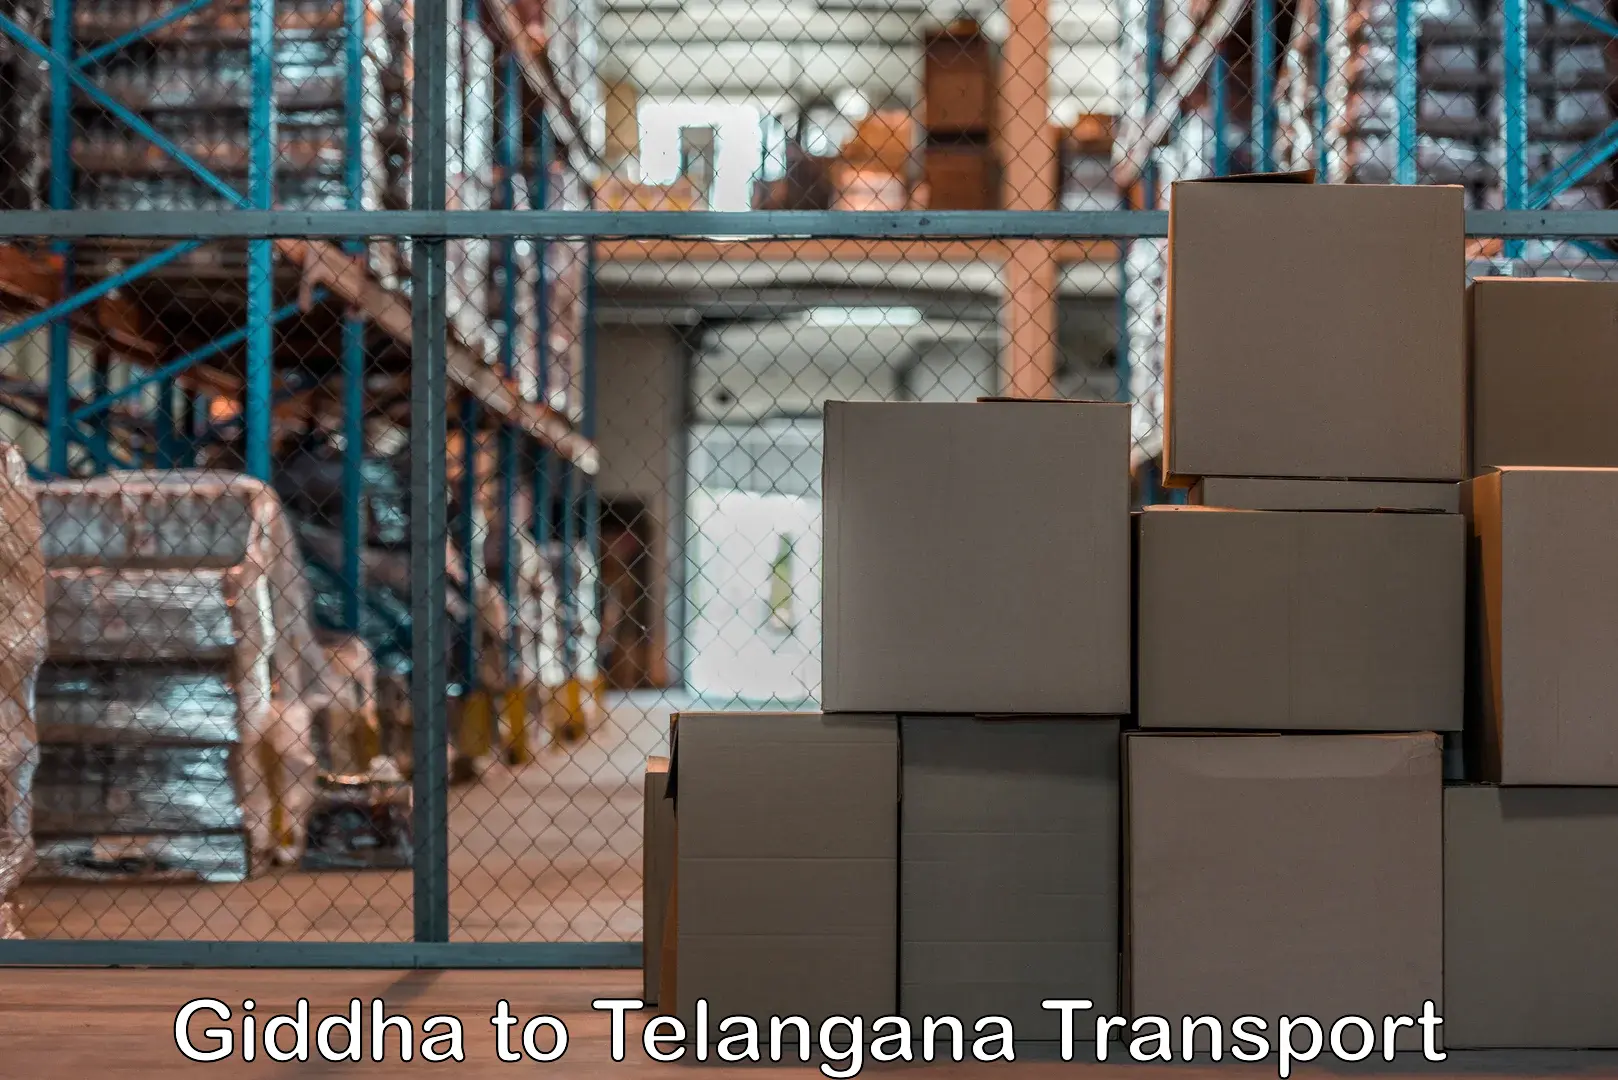 Truck transport companies in India Giddha to Ghanpur